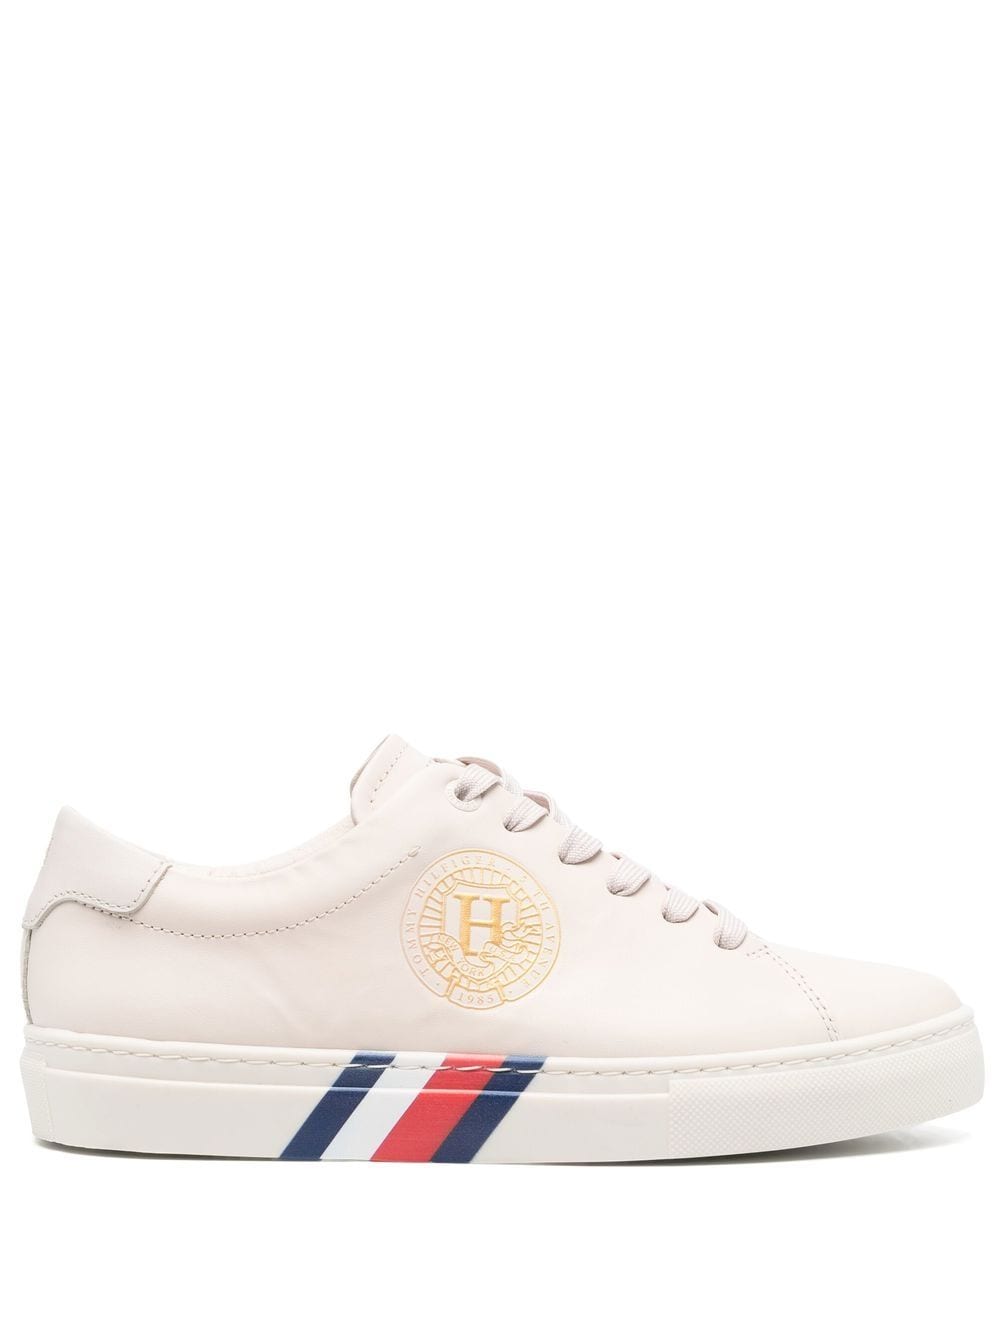 Image 1 of Tommy Hilfiger Elevated Crest low-top sneakers